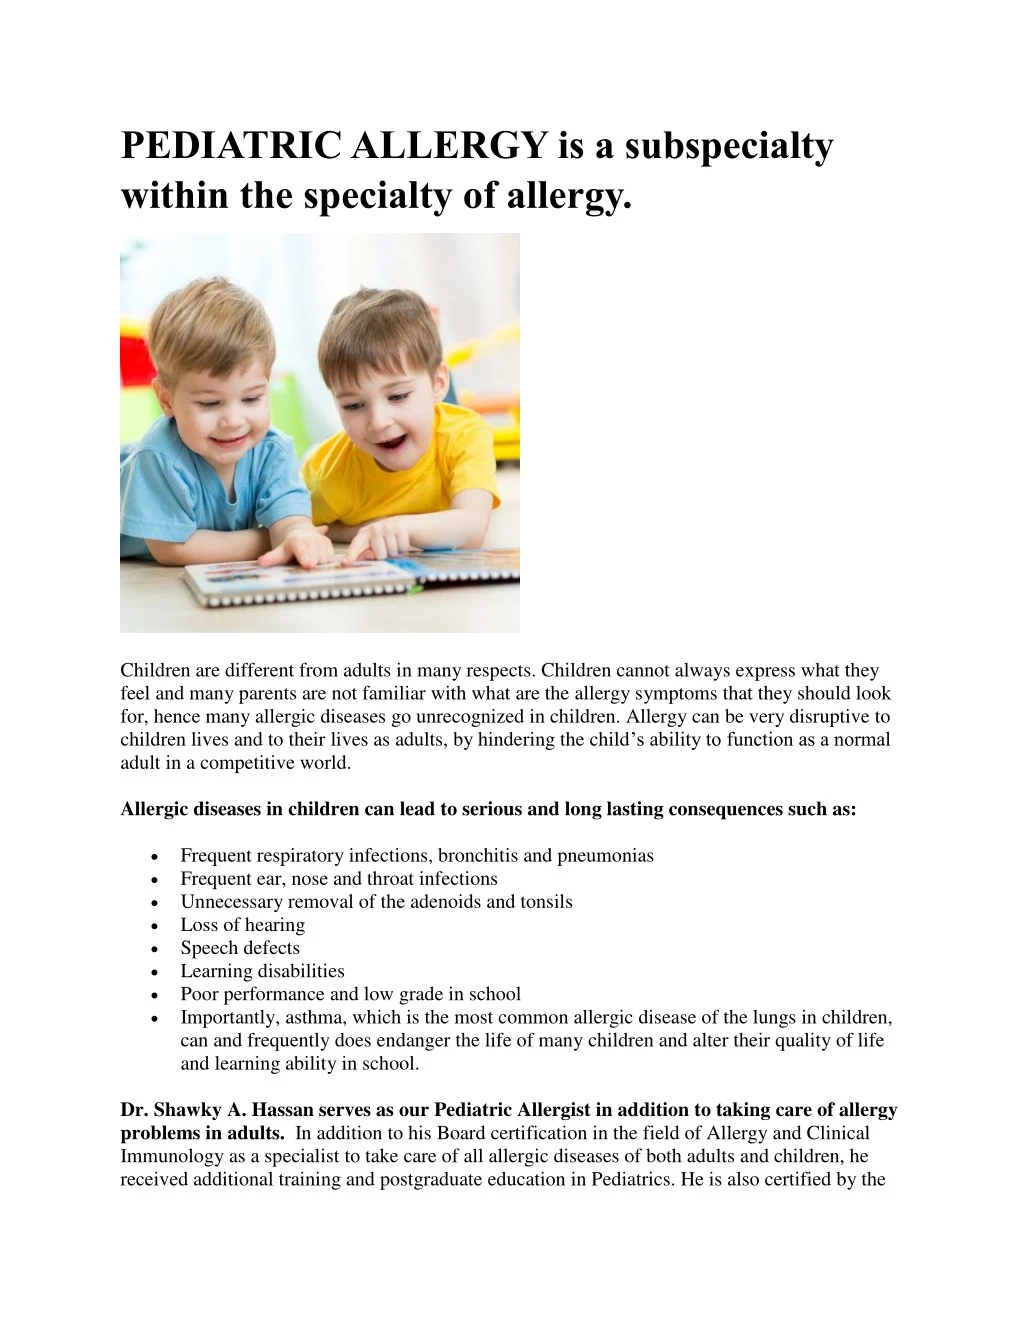 pediatric allergy is a subspecialty within